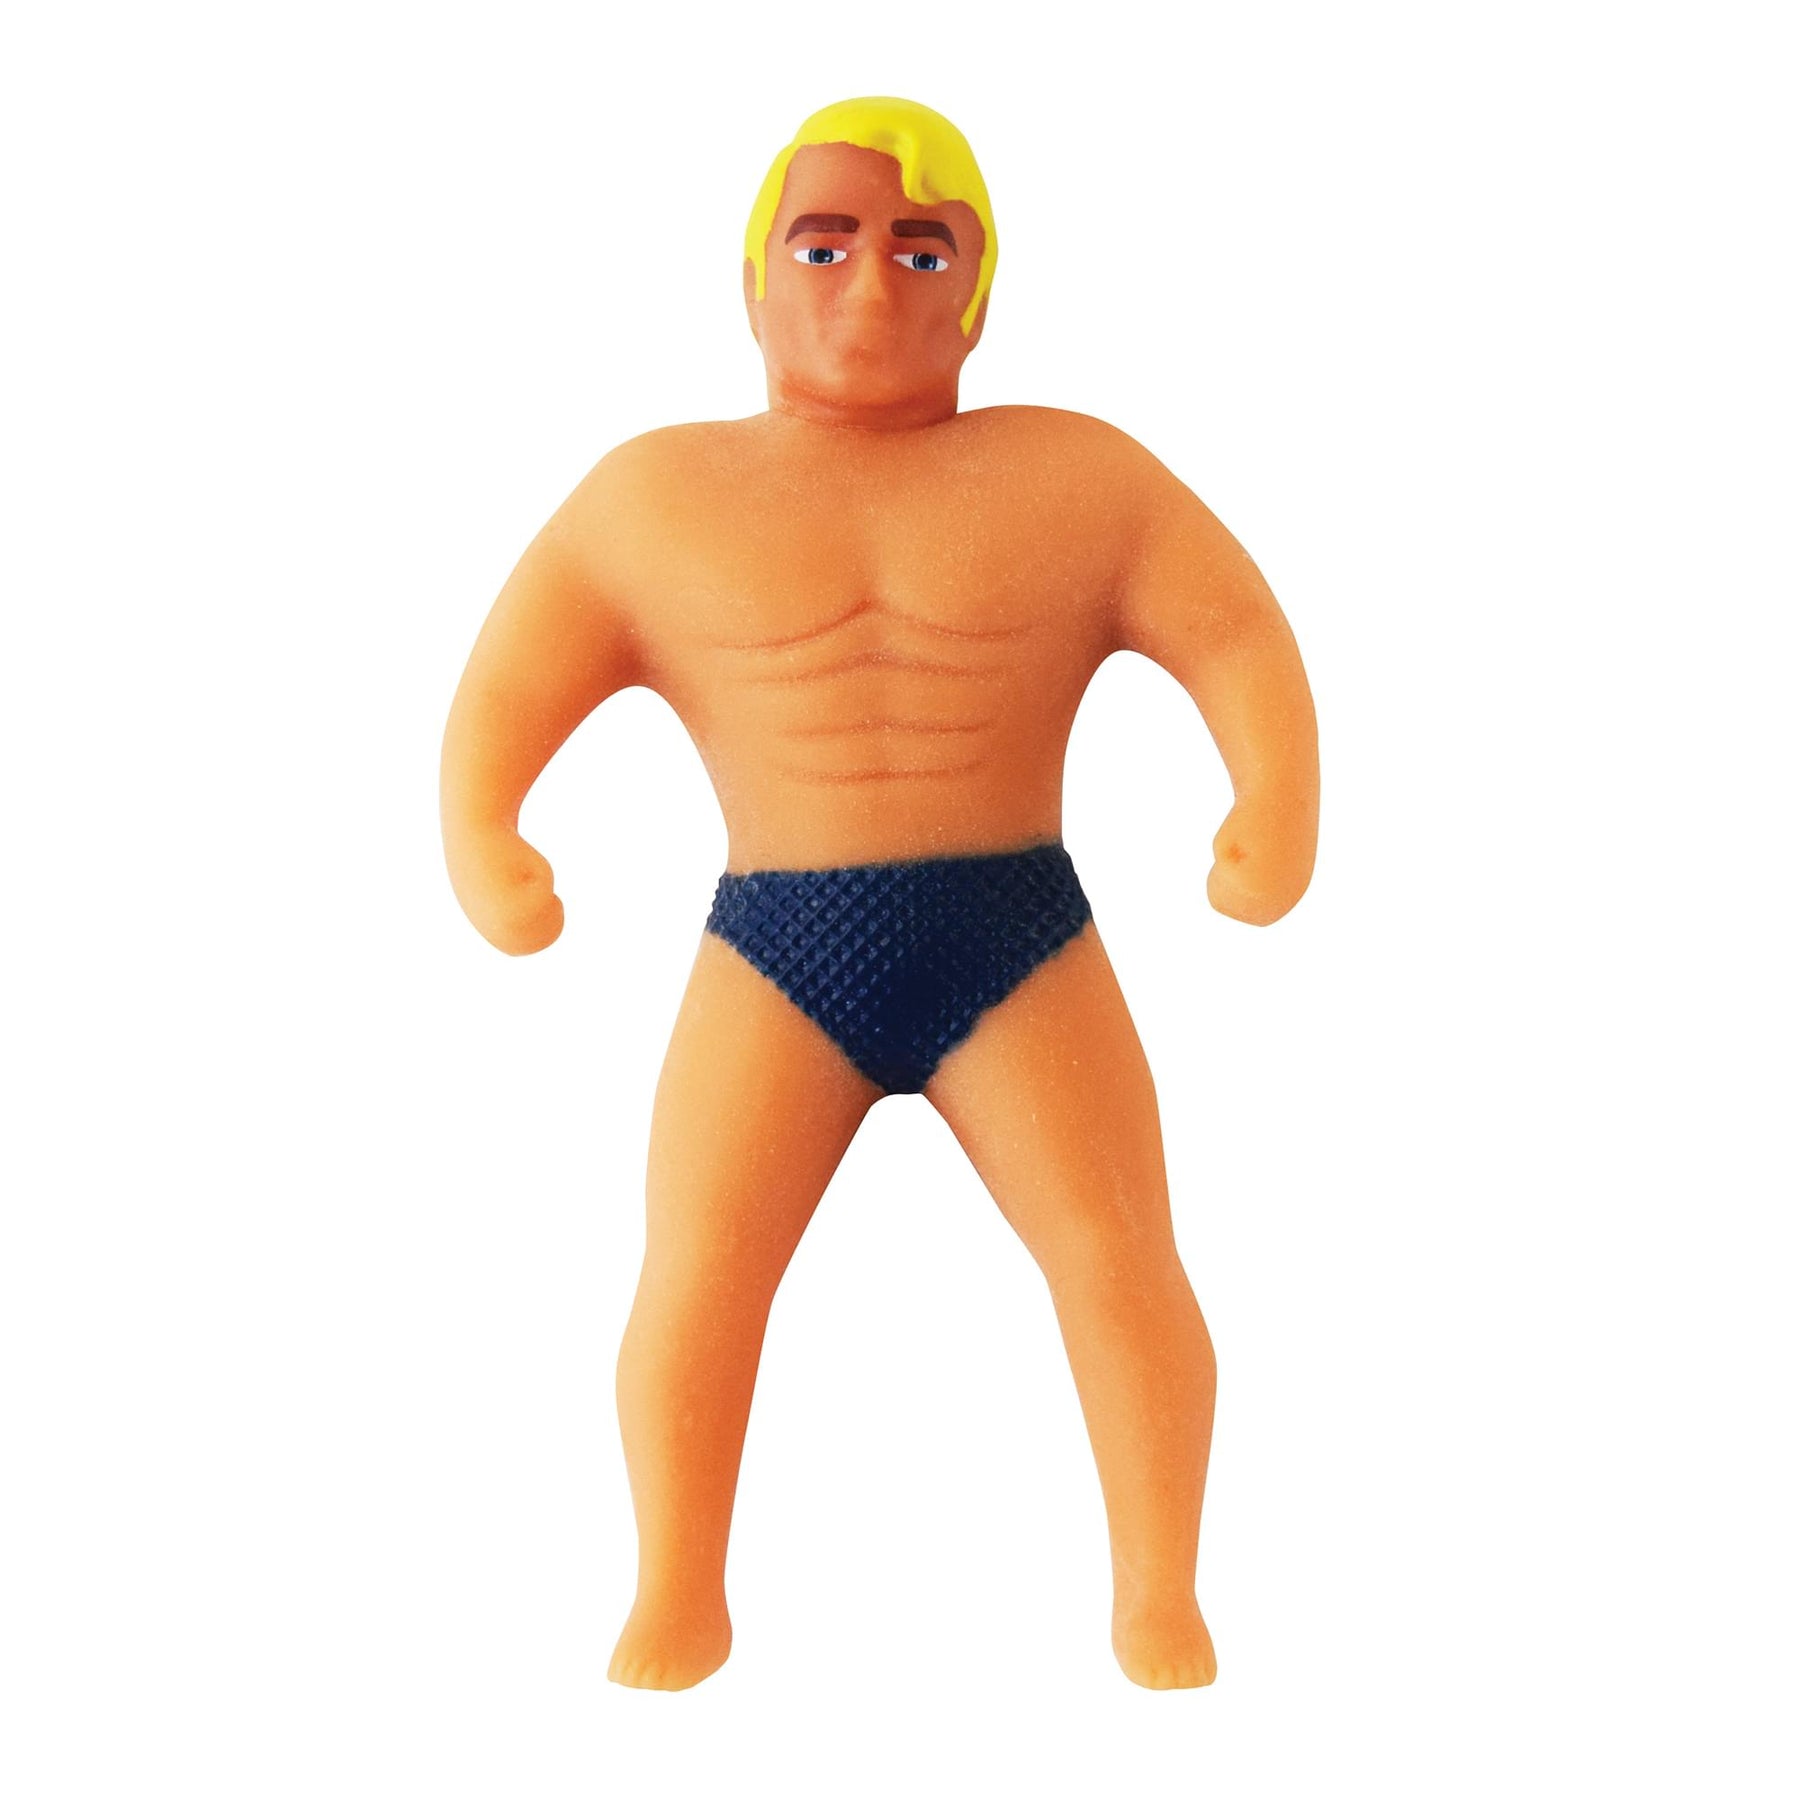 Worlds Smallest Stretch Armstrong